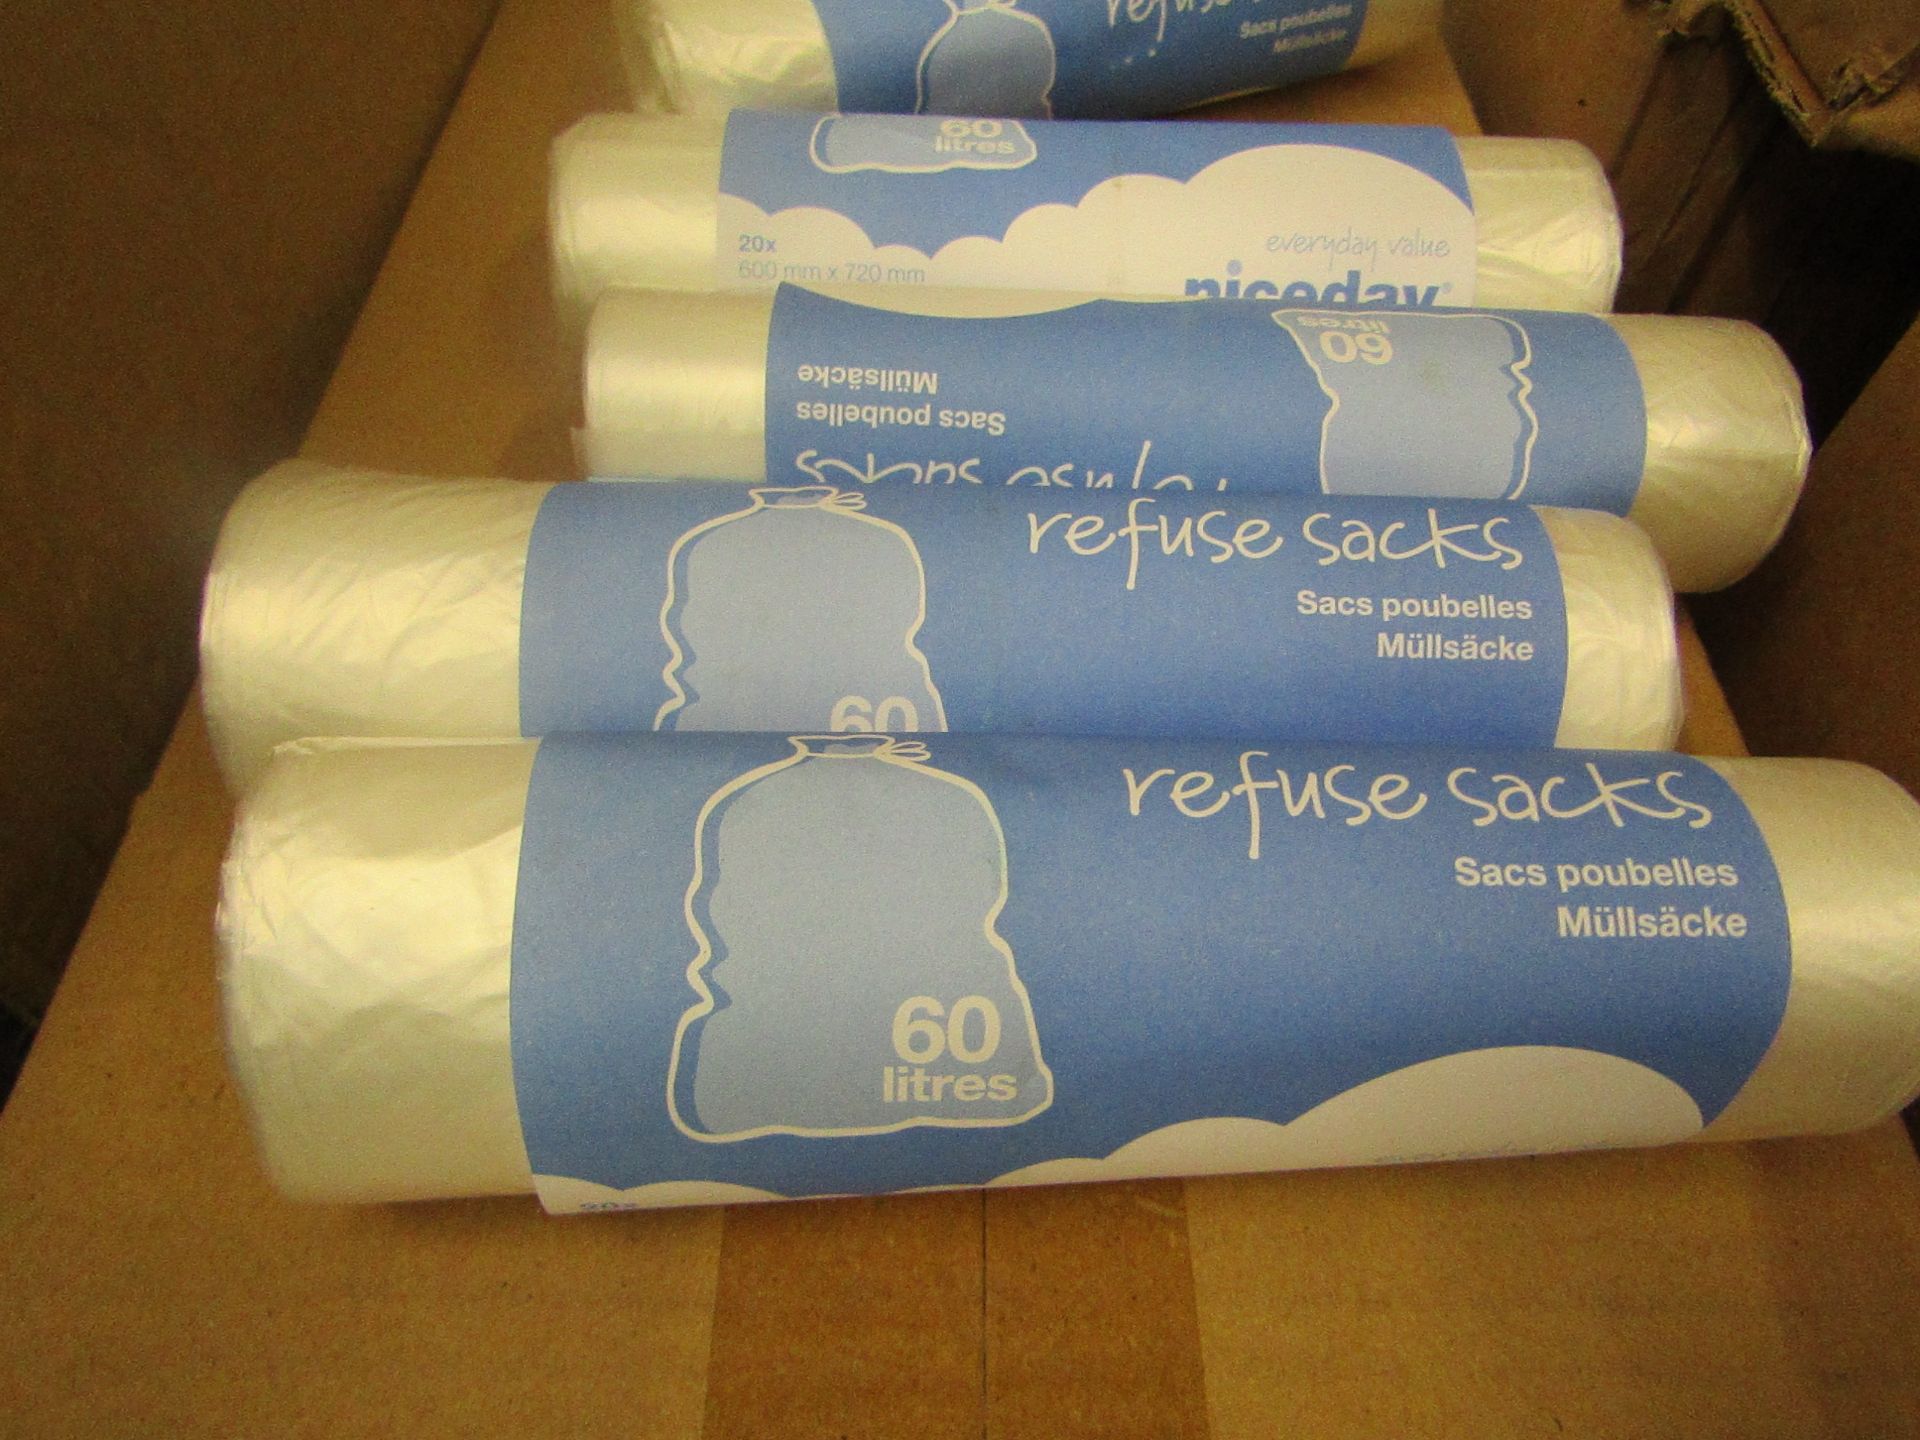 10 X packs Niceday - 20 x 60L per pack refuse sacks (600X720MM) all new and packaged.